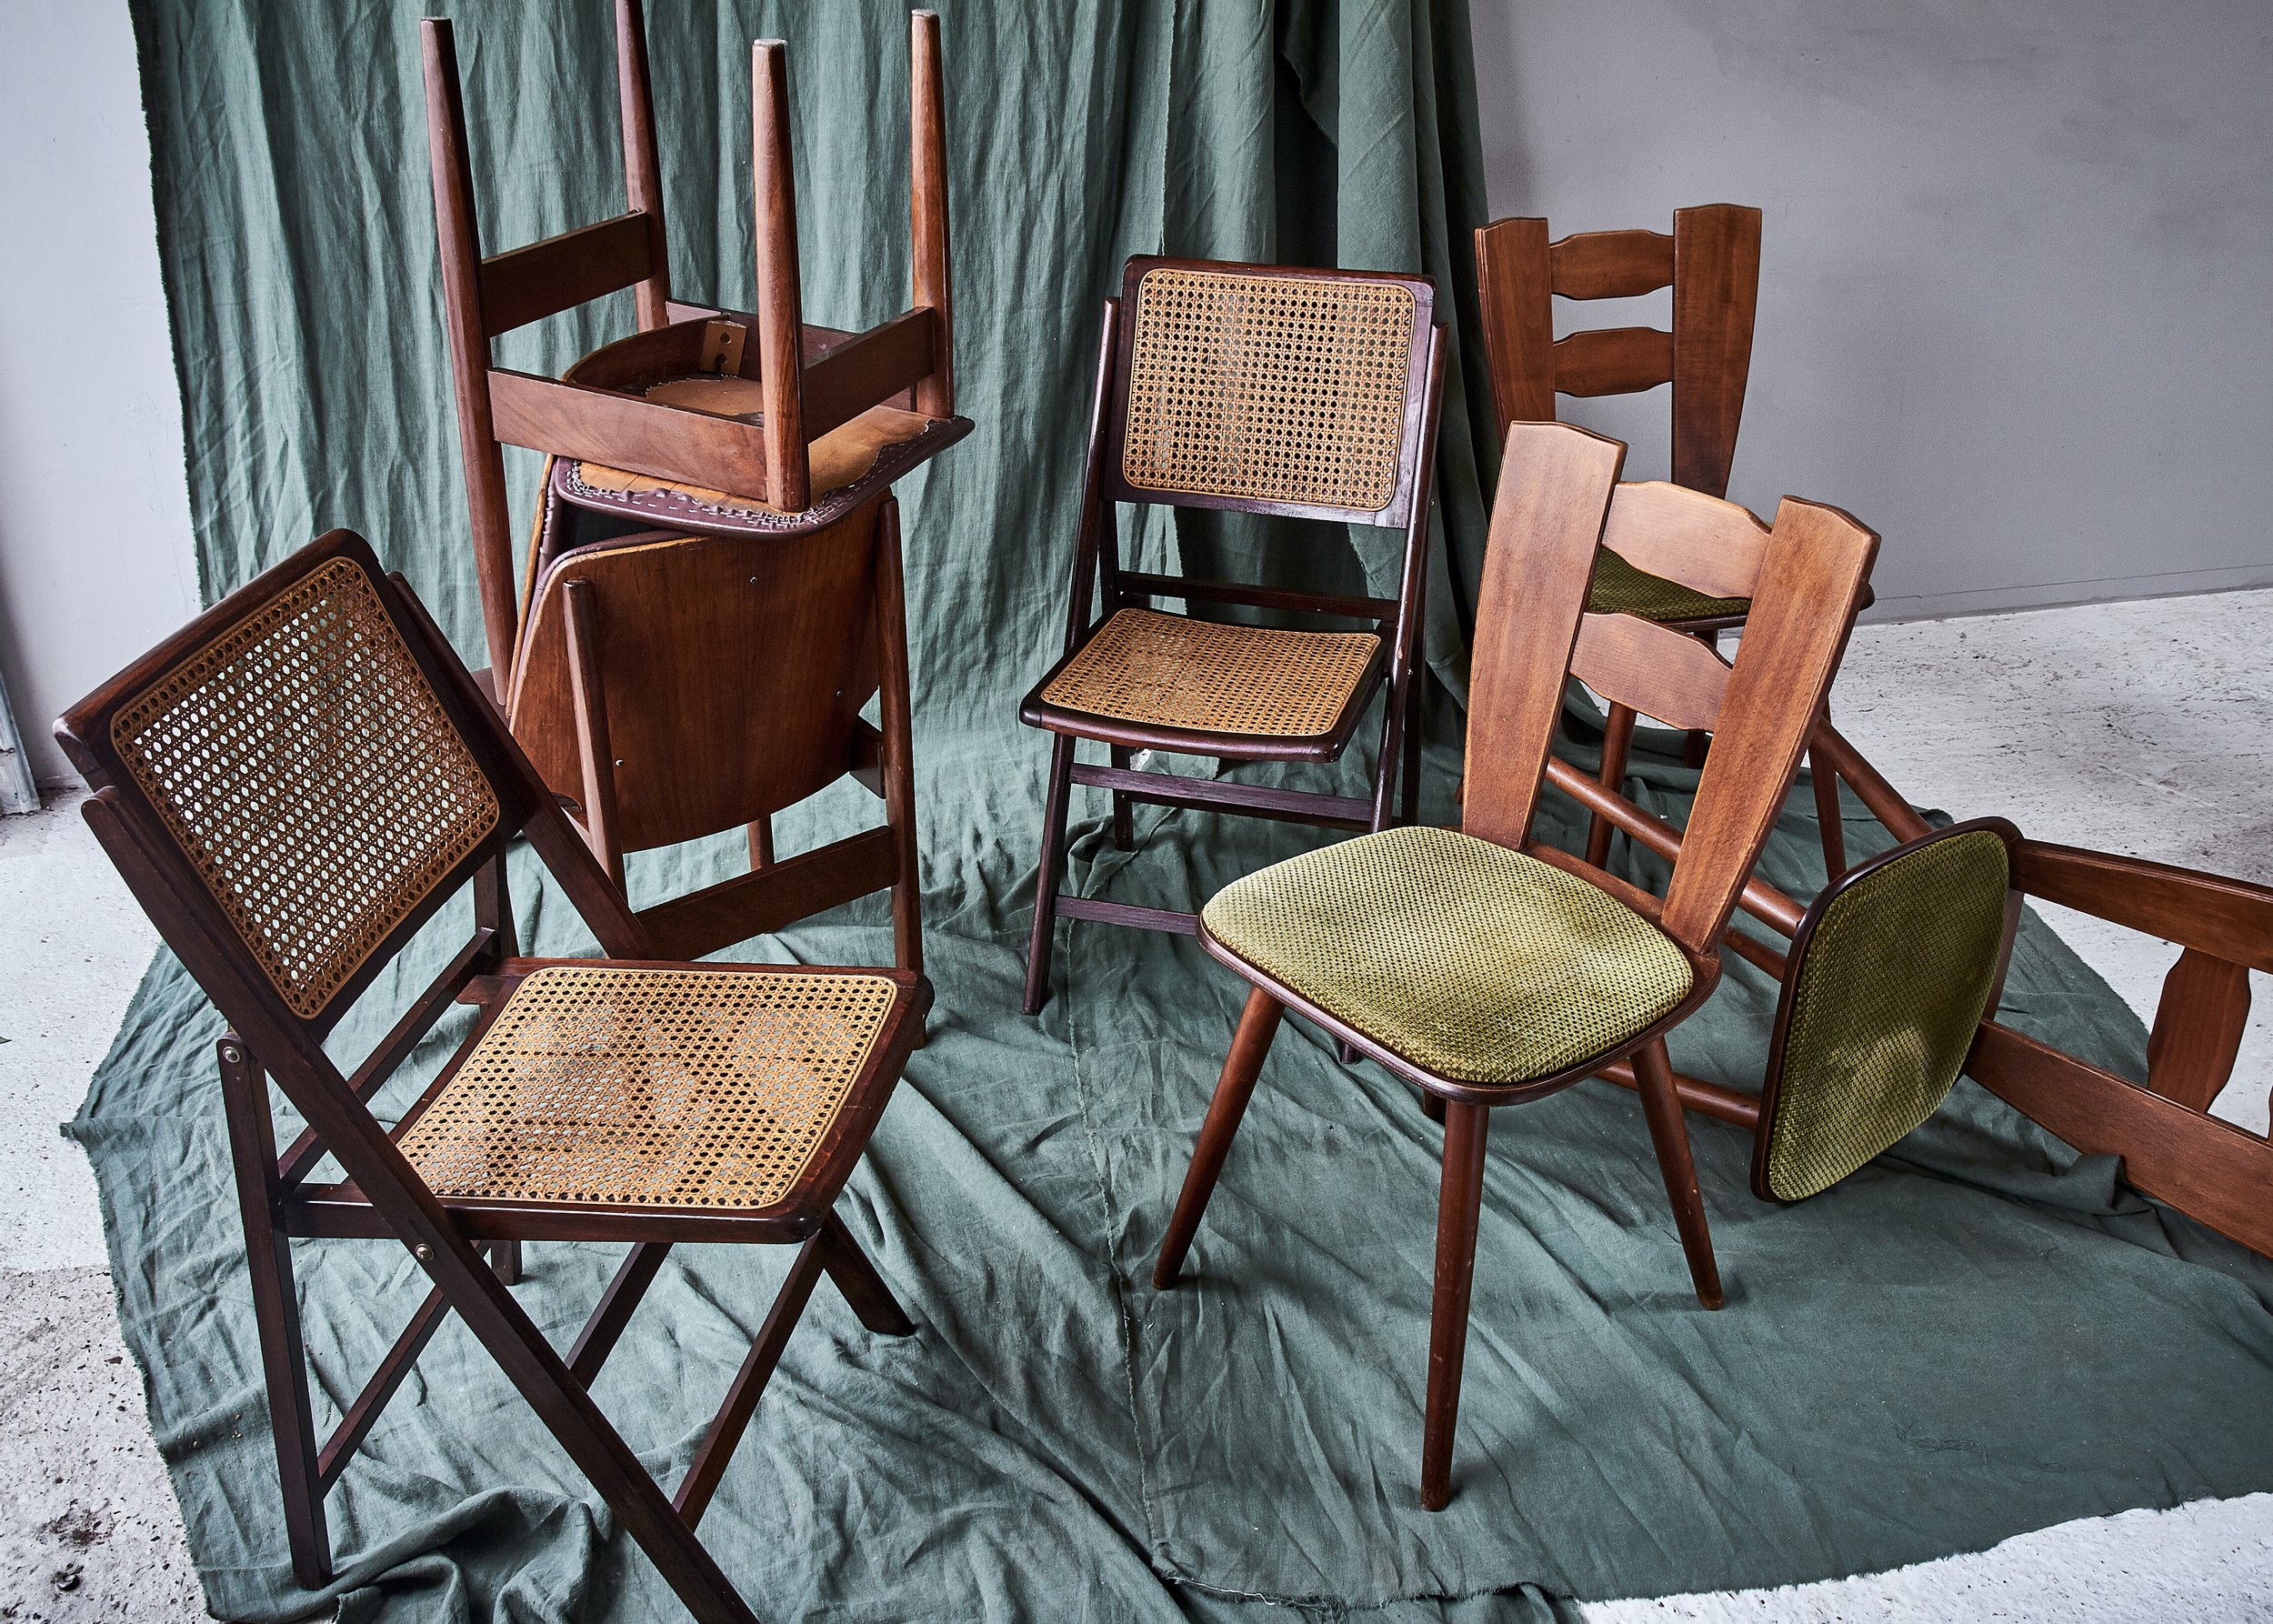 Chair Collection_014.jpg